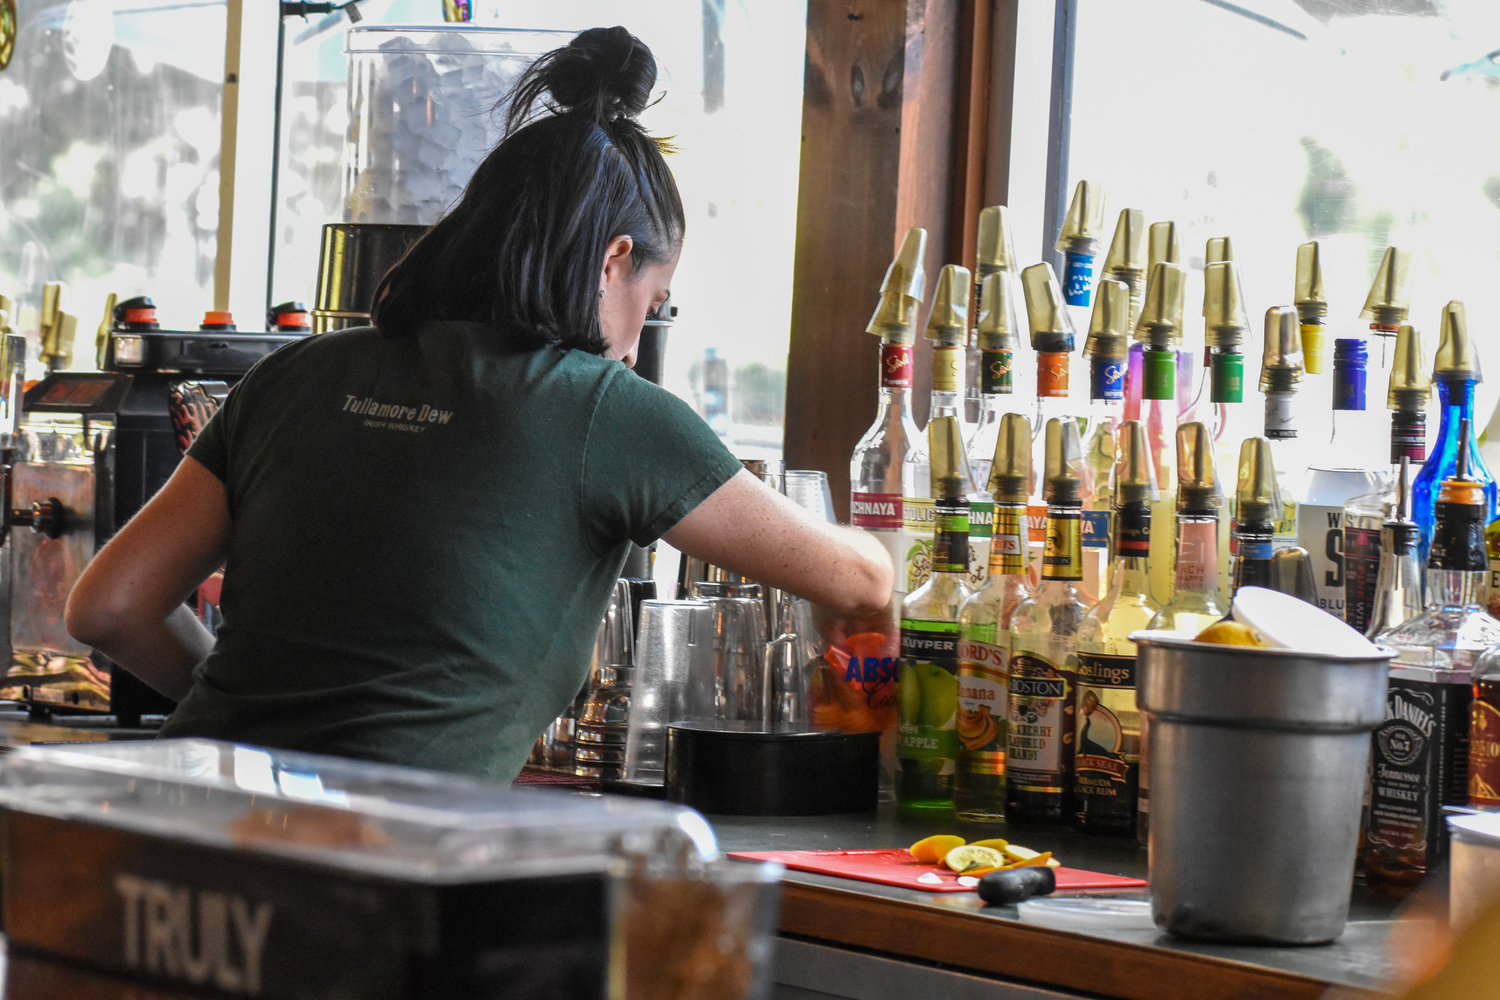 Kelly DeSantis has been a bartender at the Crazy Clam for over five years.